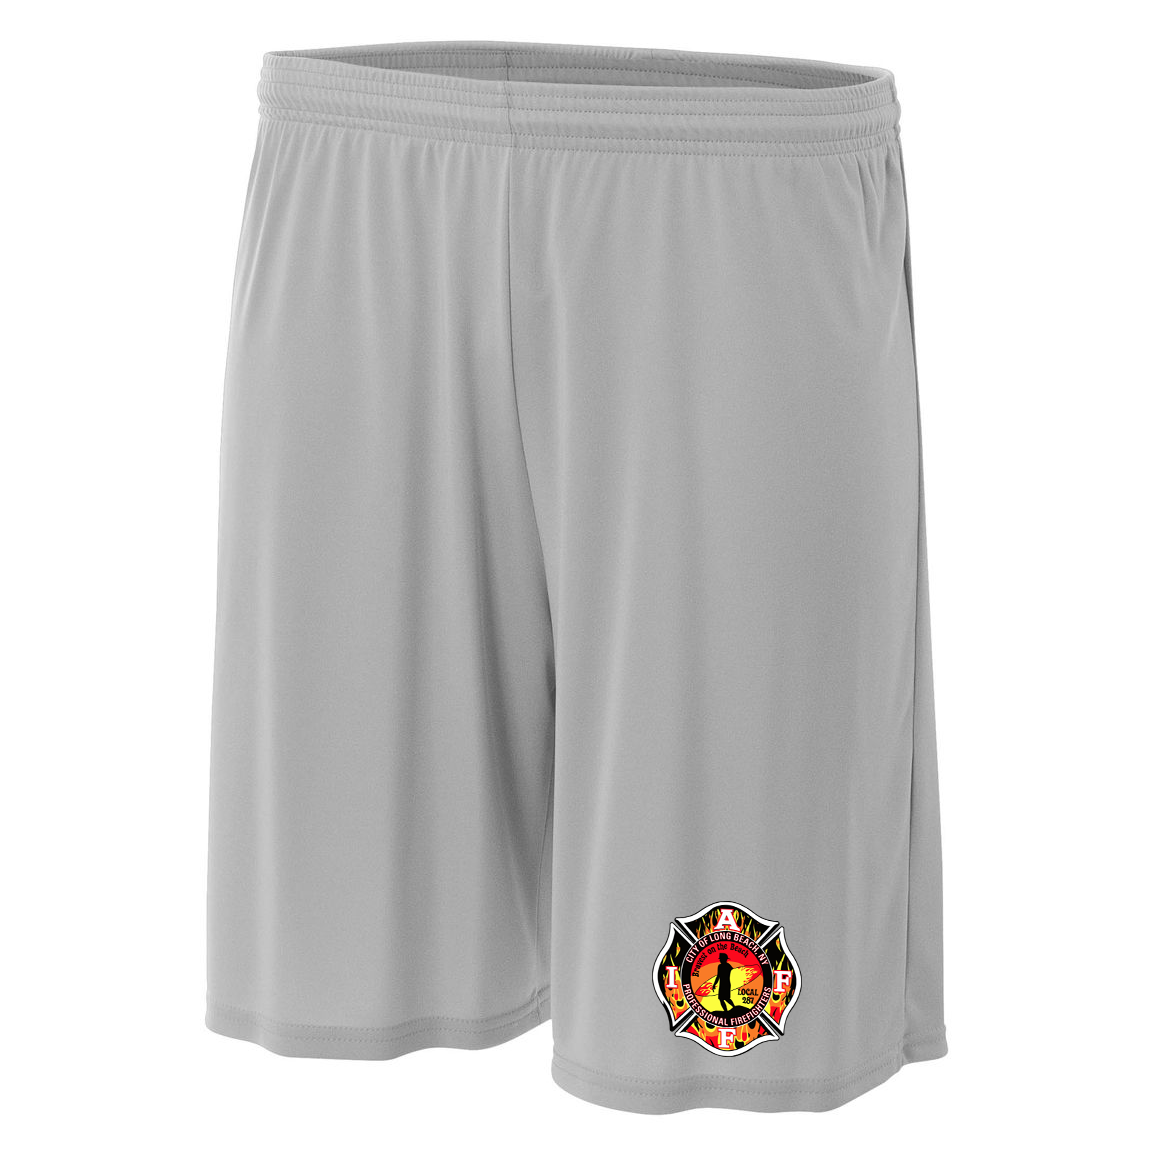 Long Beach Professional Firefighters Cooling 7" Performance Shorts